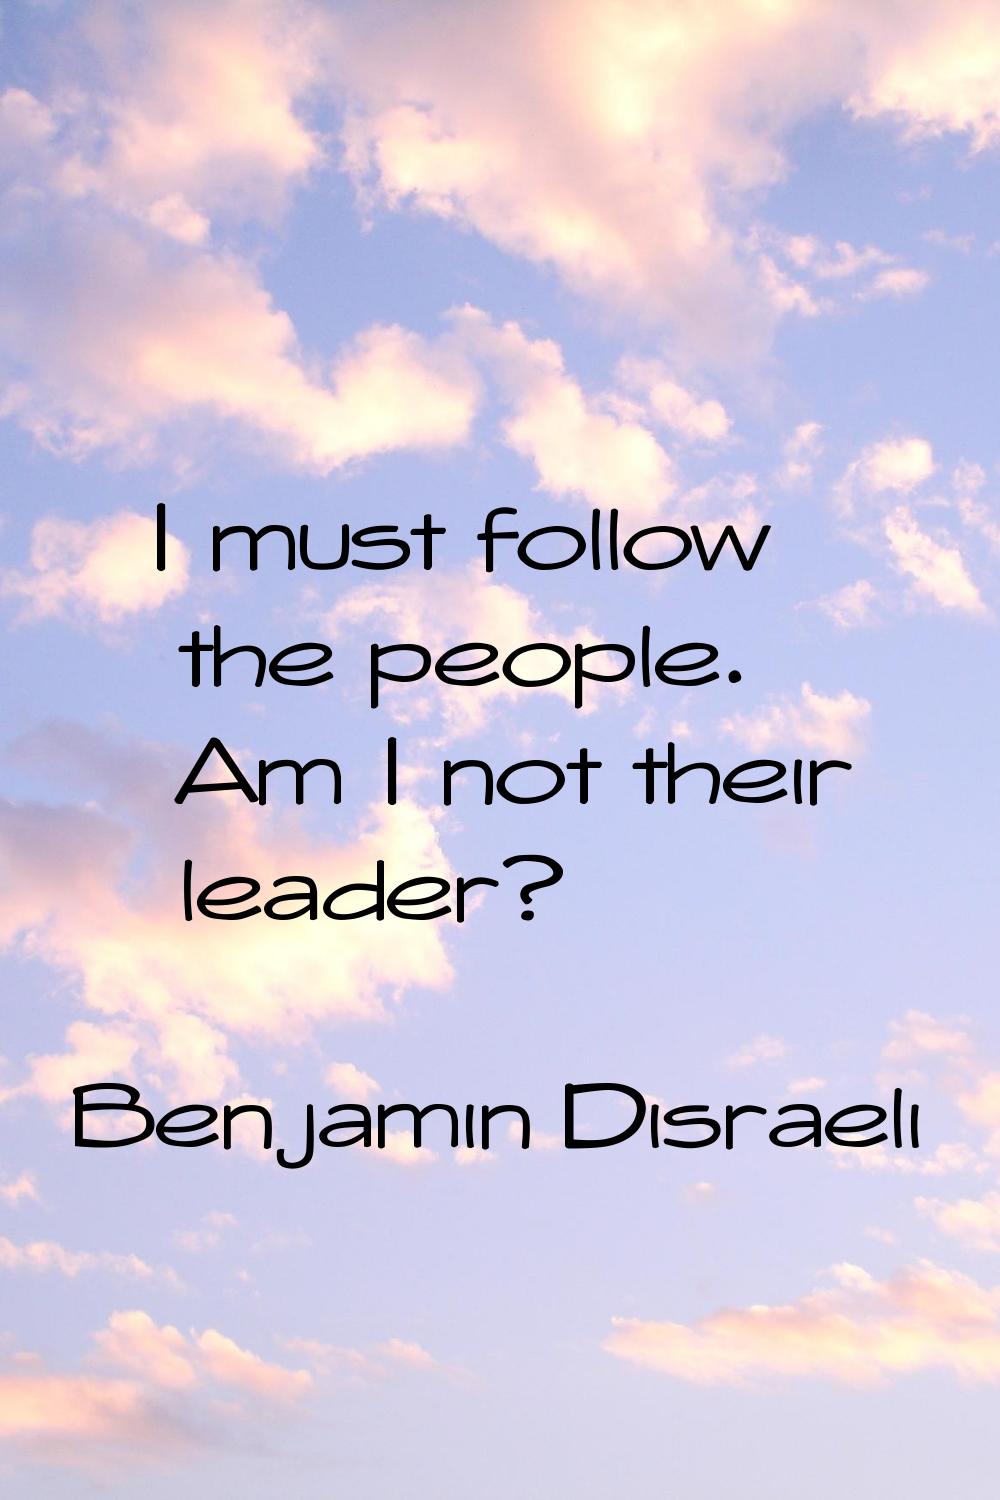 I must follow the people. Am I not their leader?